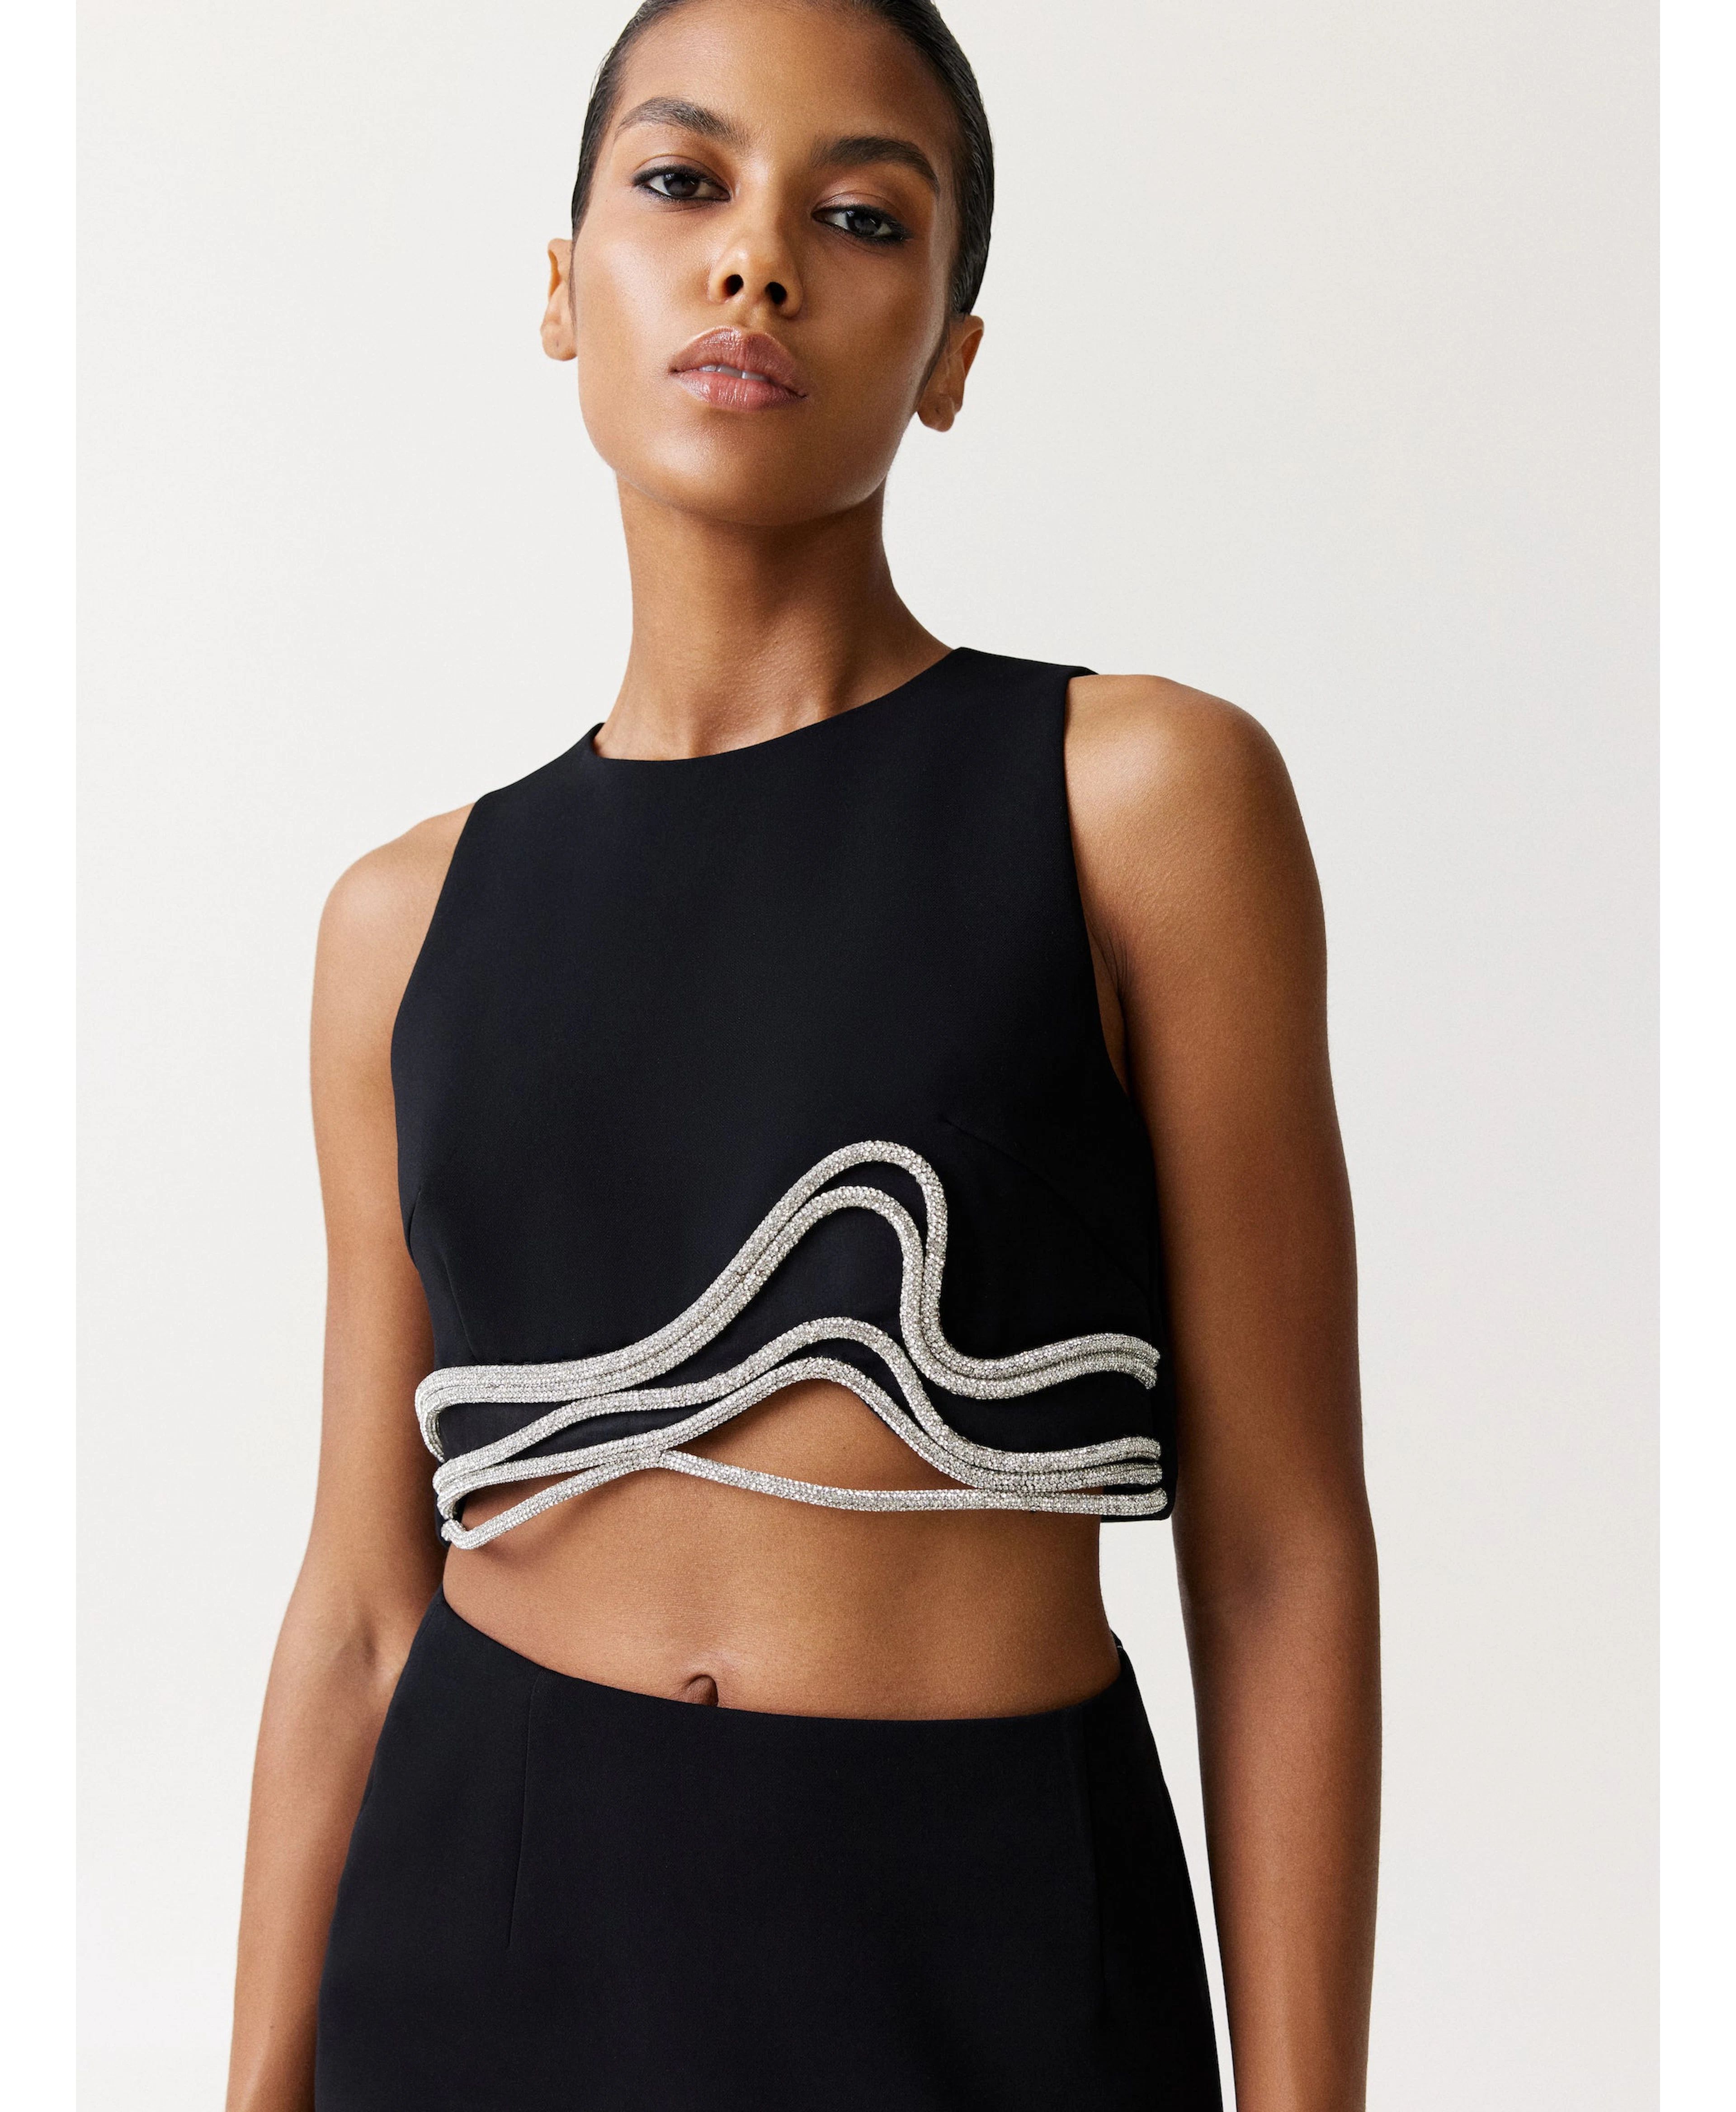 Shop Cutout Embellished Top from NDS The Label at Seezona | Seezona | Seezona